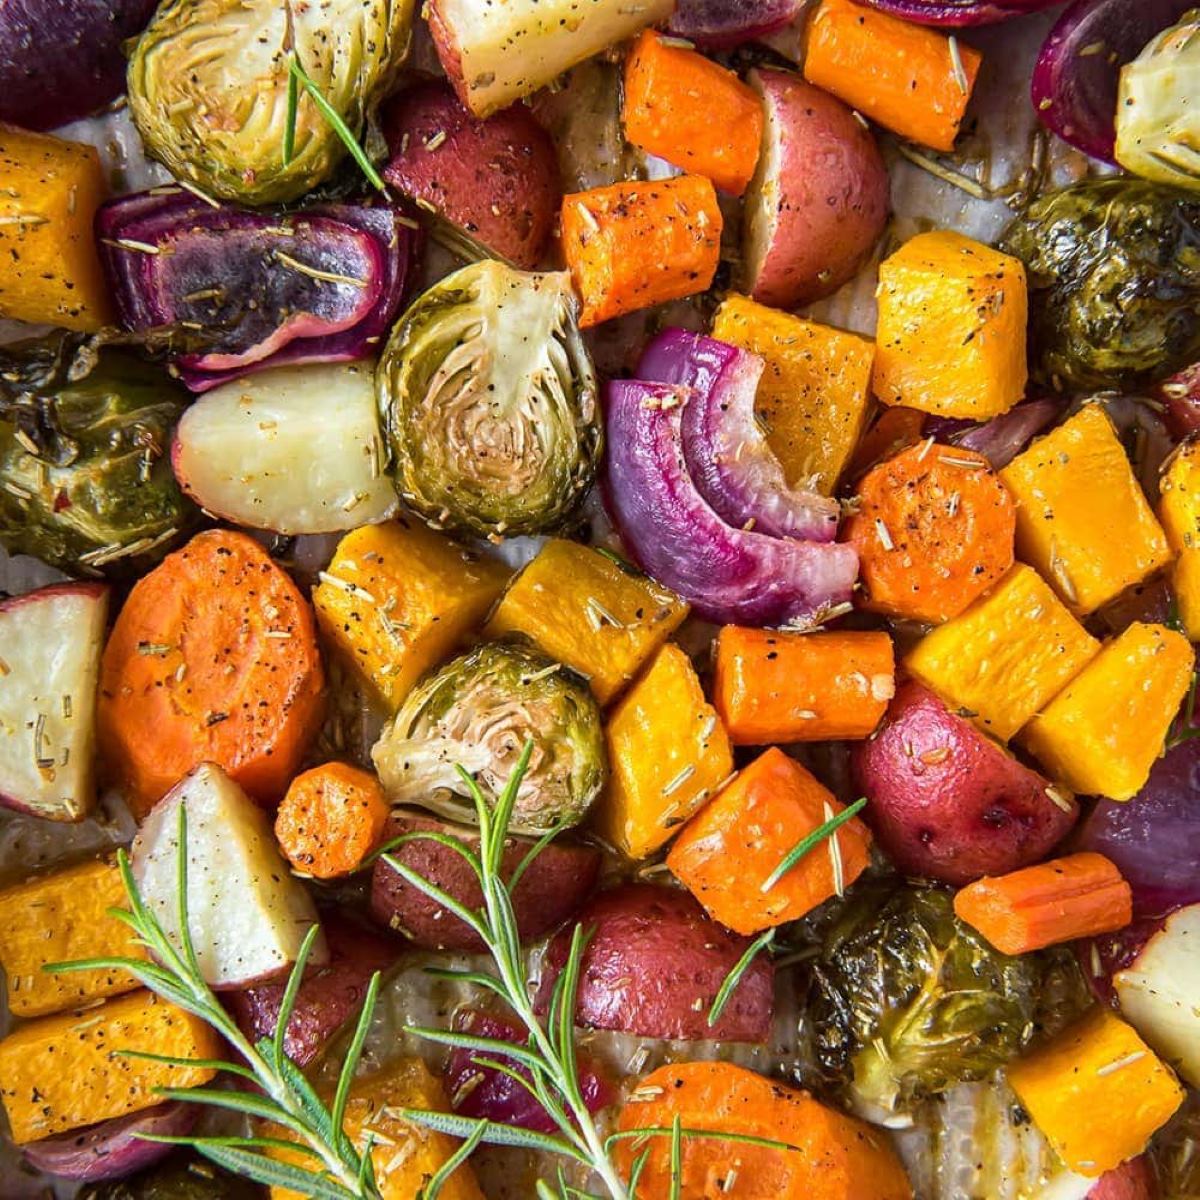 How To Store Roasted Vegetables